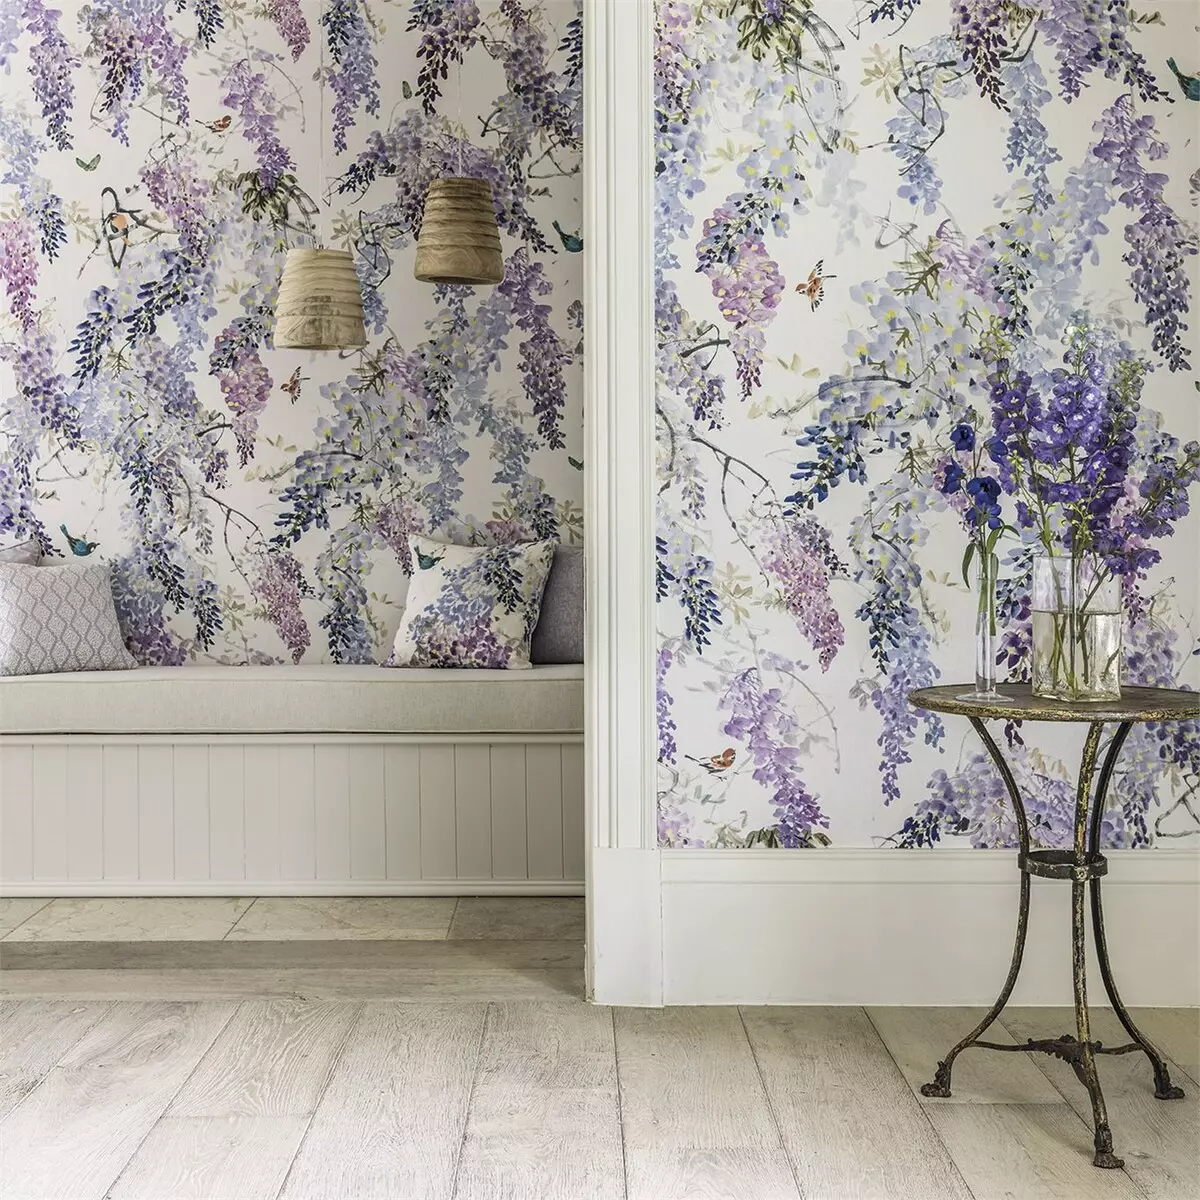 Floral wallpapers: 10 bright ideas for interior